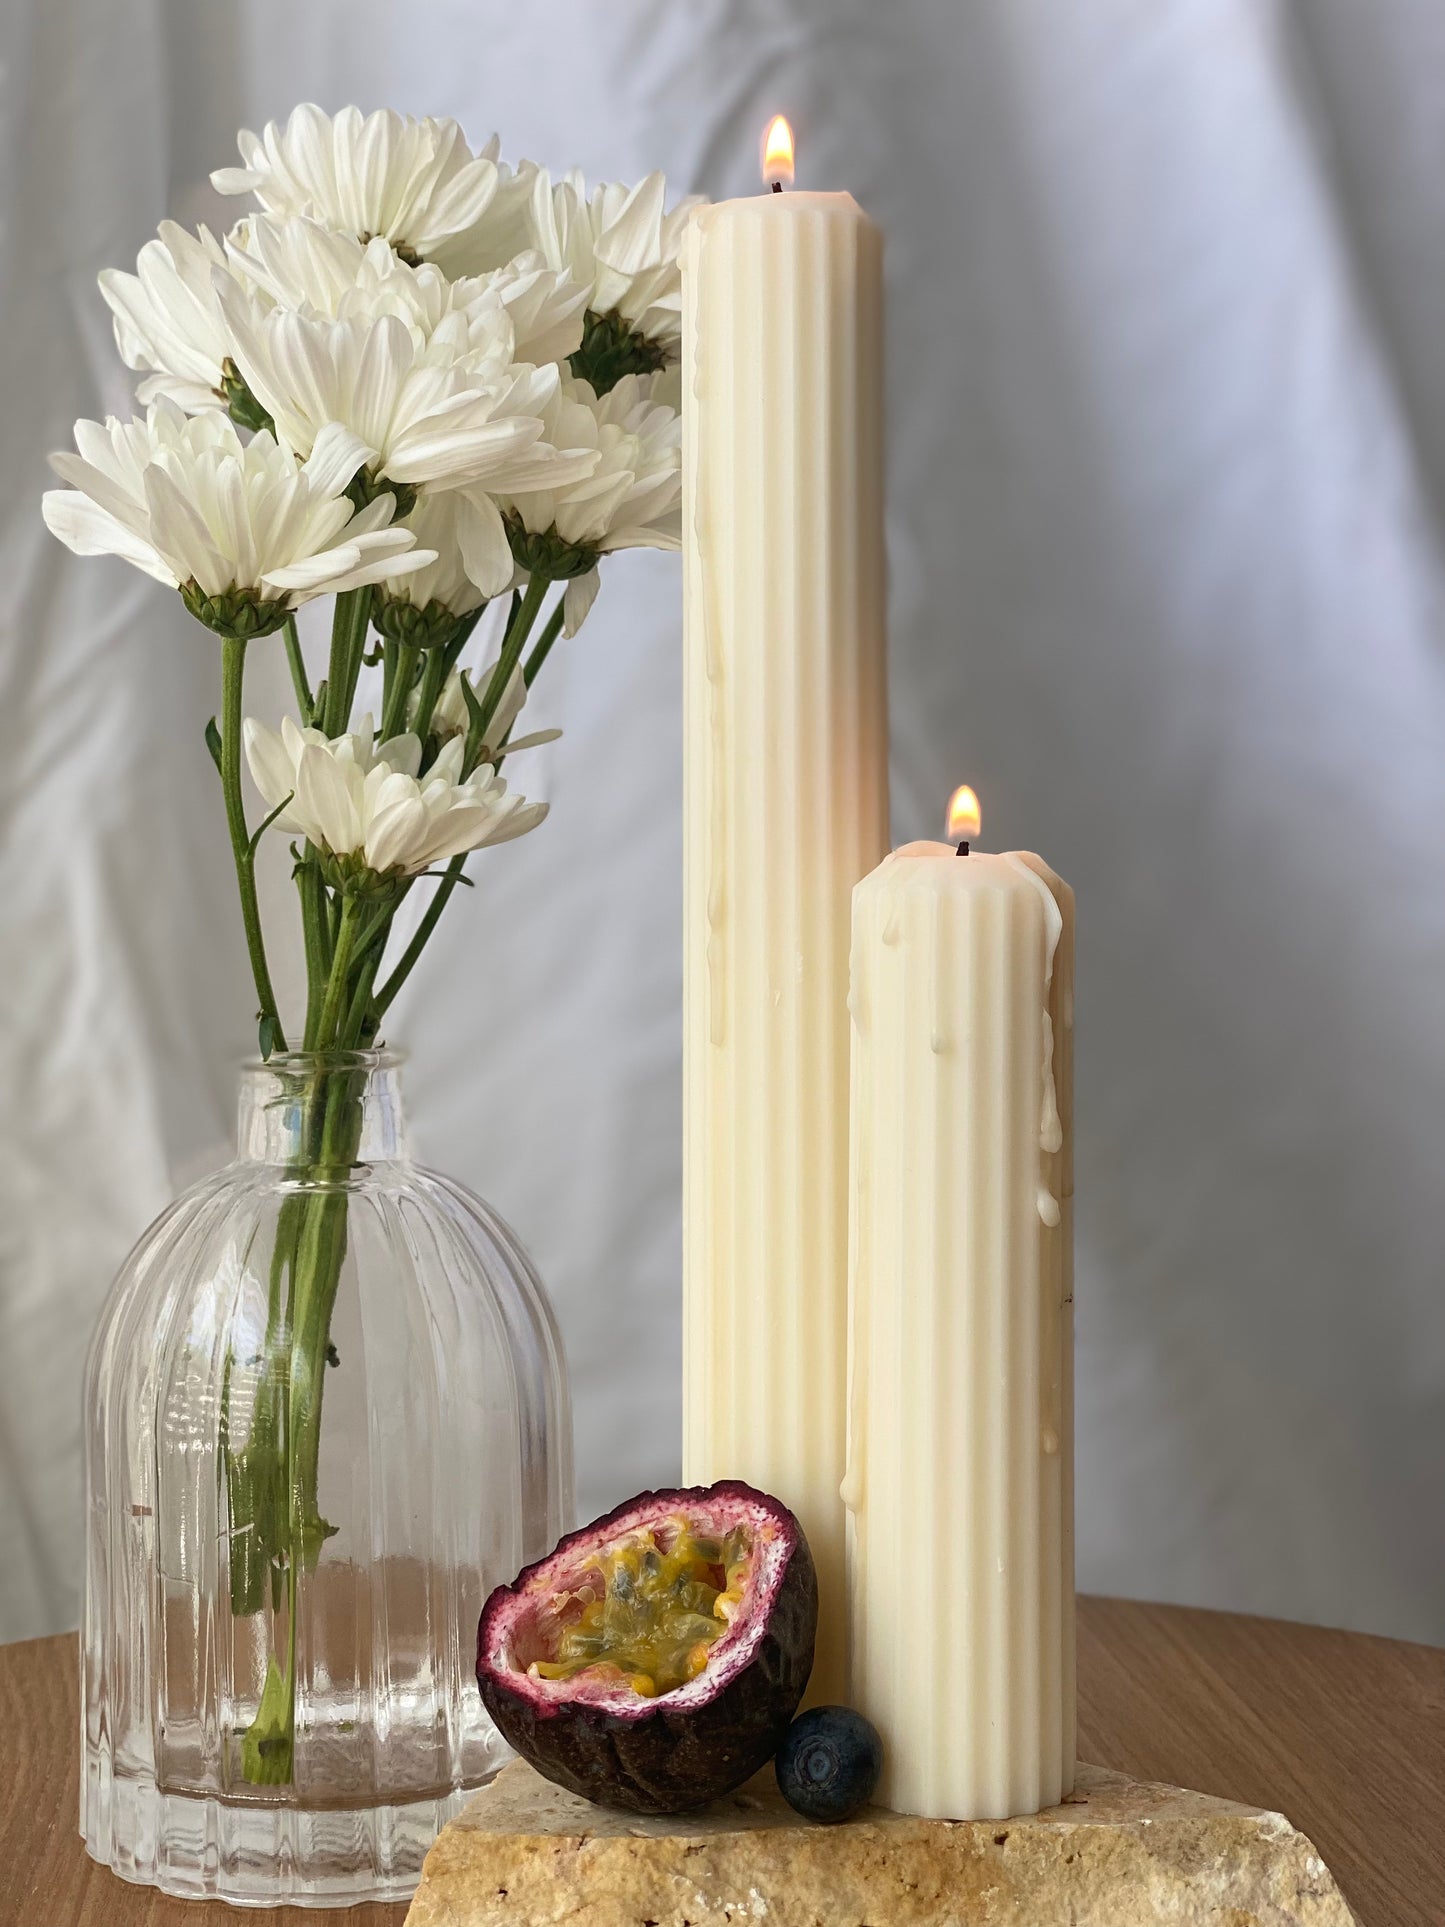 Case candles in bulk for wedding & events | Wedding candle centerpieces | Wedding reception candles | Candle wedding centerpieces on a budget | Free Standing Candles | Paraffin Free Candles | Unscented Candles | Column Candles | Free Standing Candles Aust